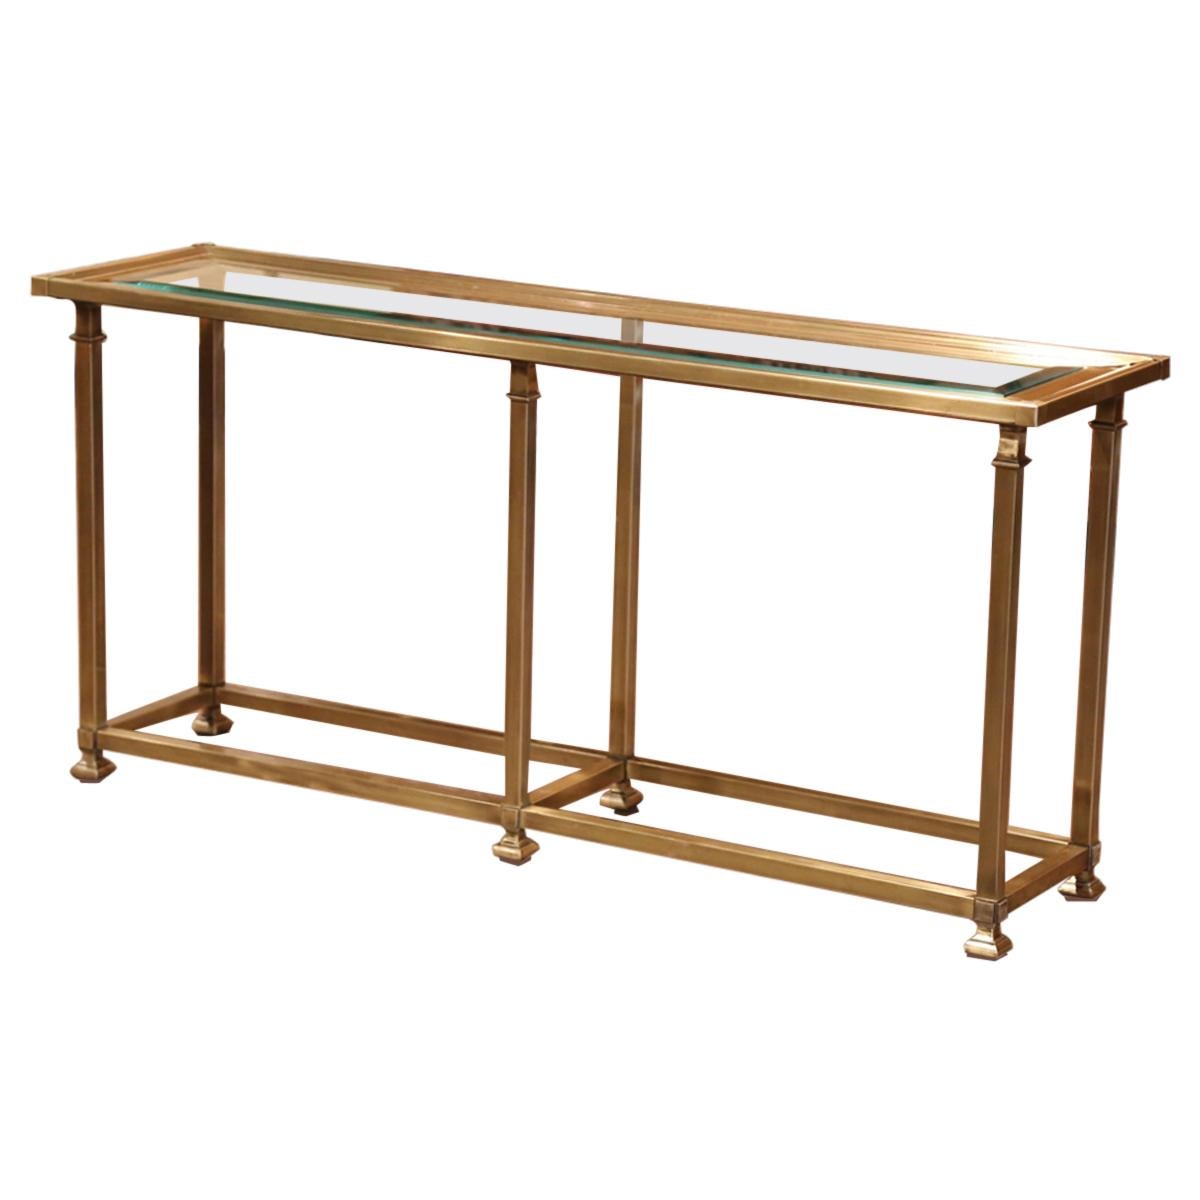 Midcentury French Six-Leg Brass and Beveled Glass Console Table Jansen Style